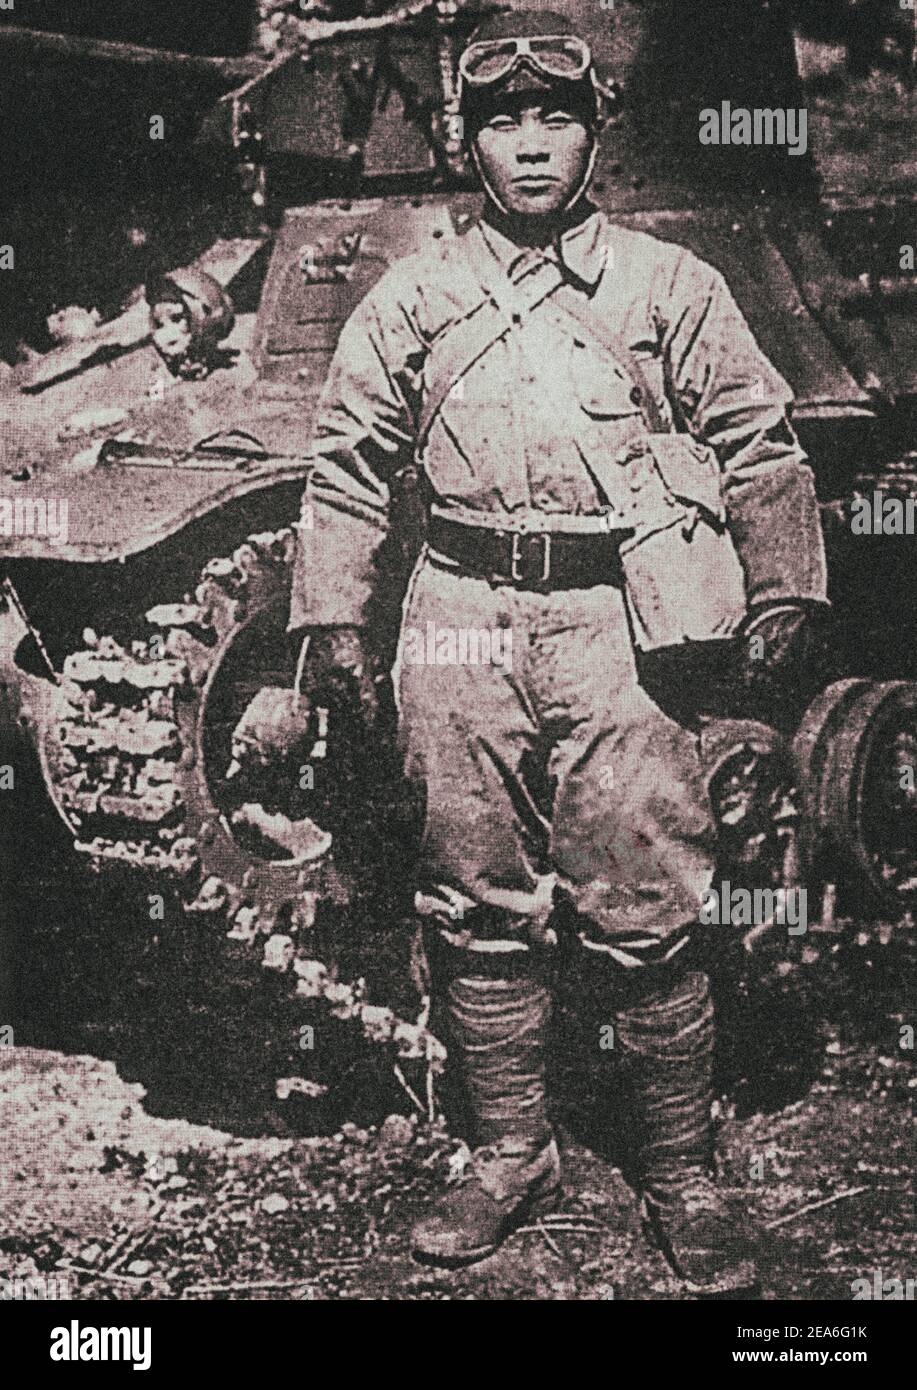 Japanese tanker posing against the background of his combat vehicle – Type 95 “Ha-Go” light tank. Type 95 is a Japanese light tank of the 1930s. Also Stock Photo